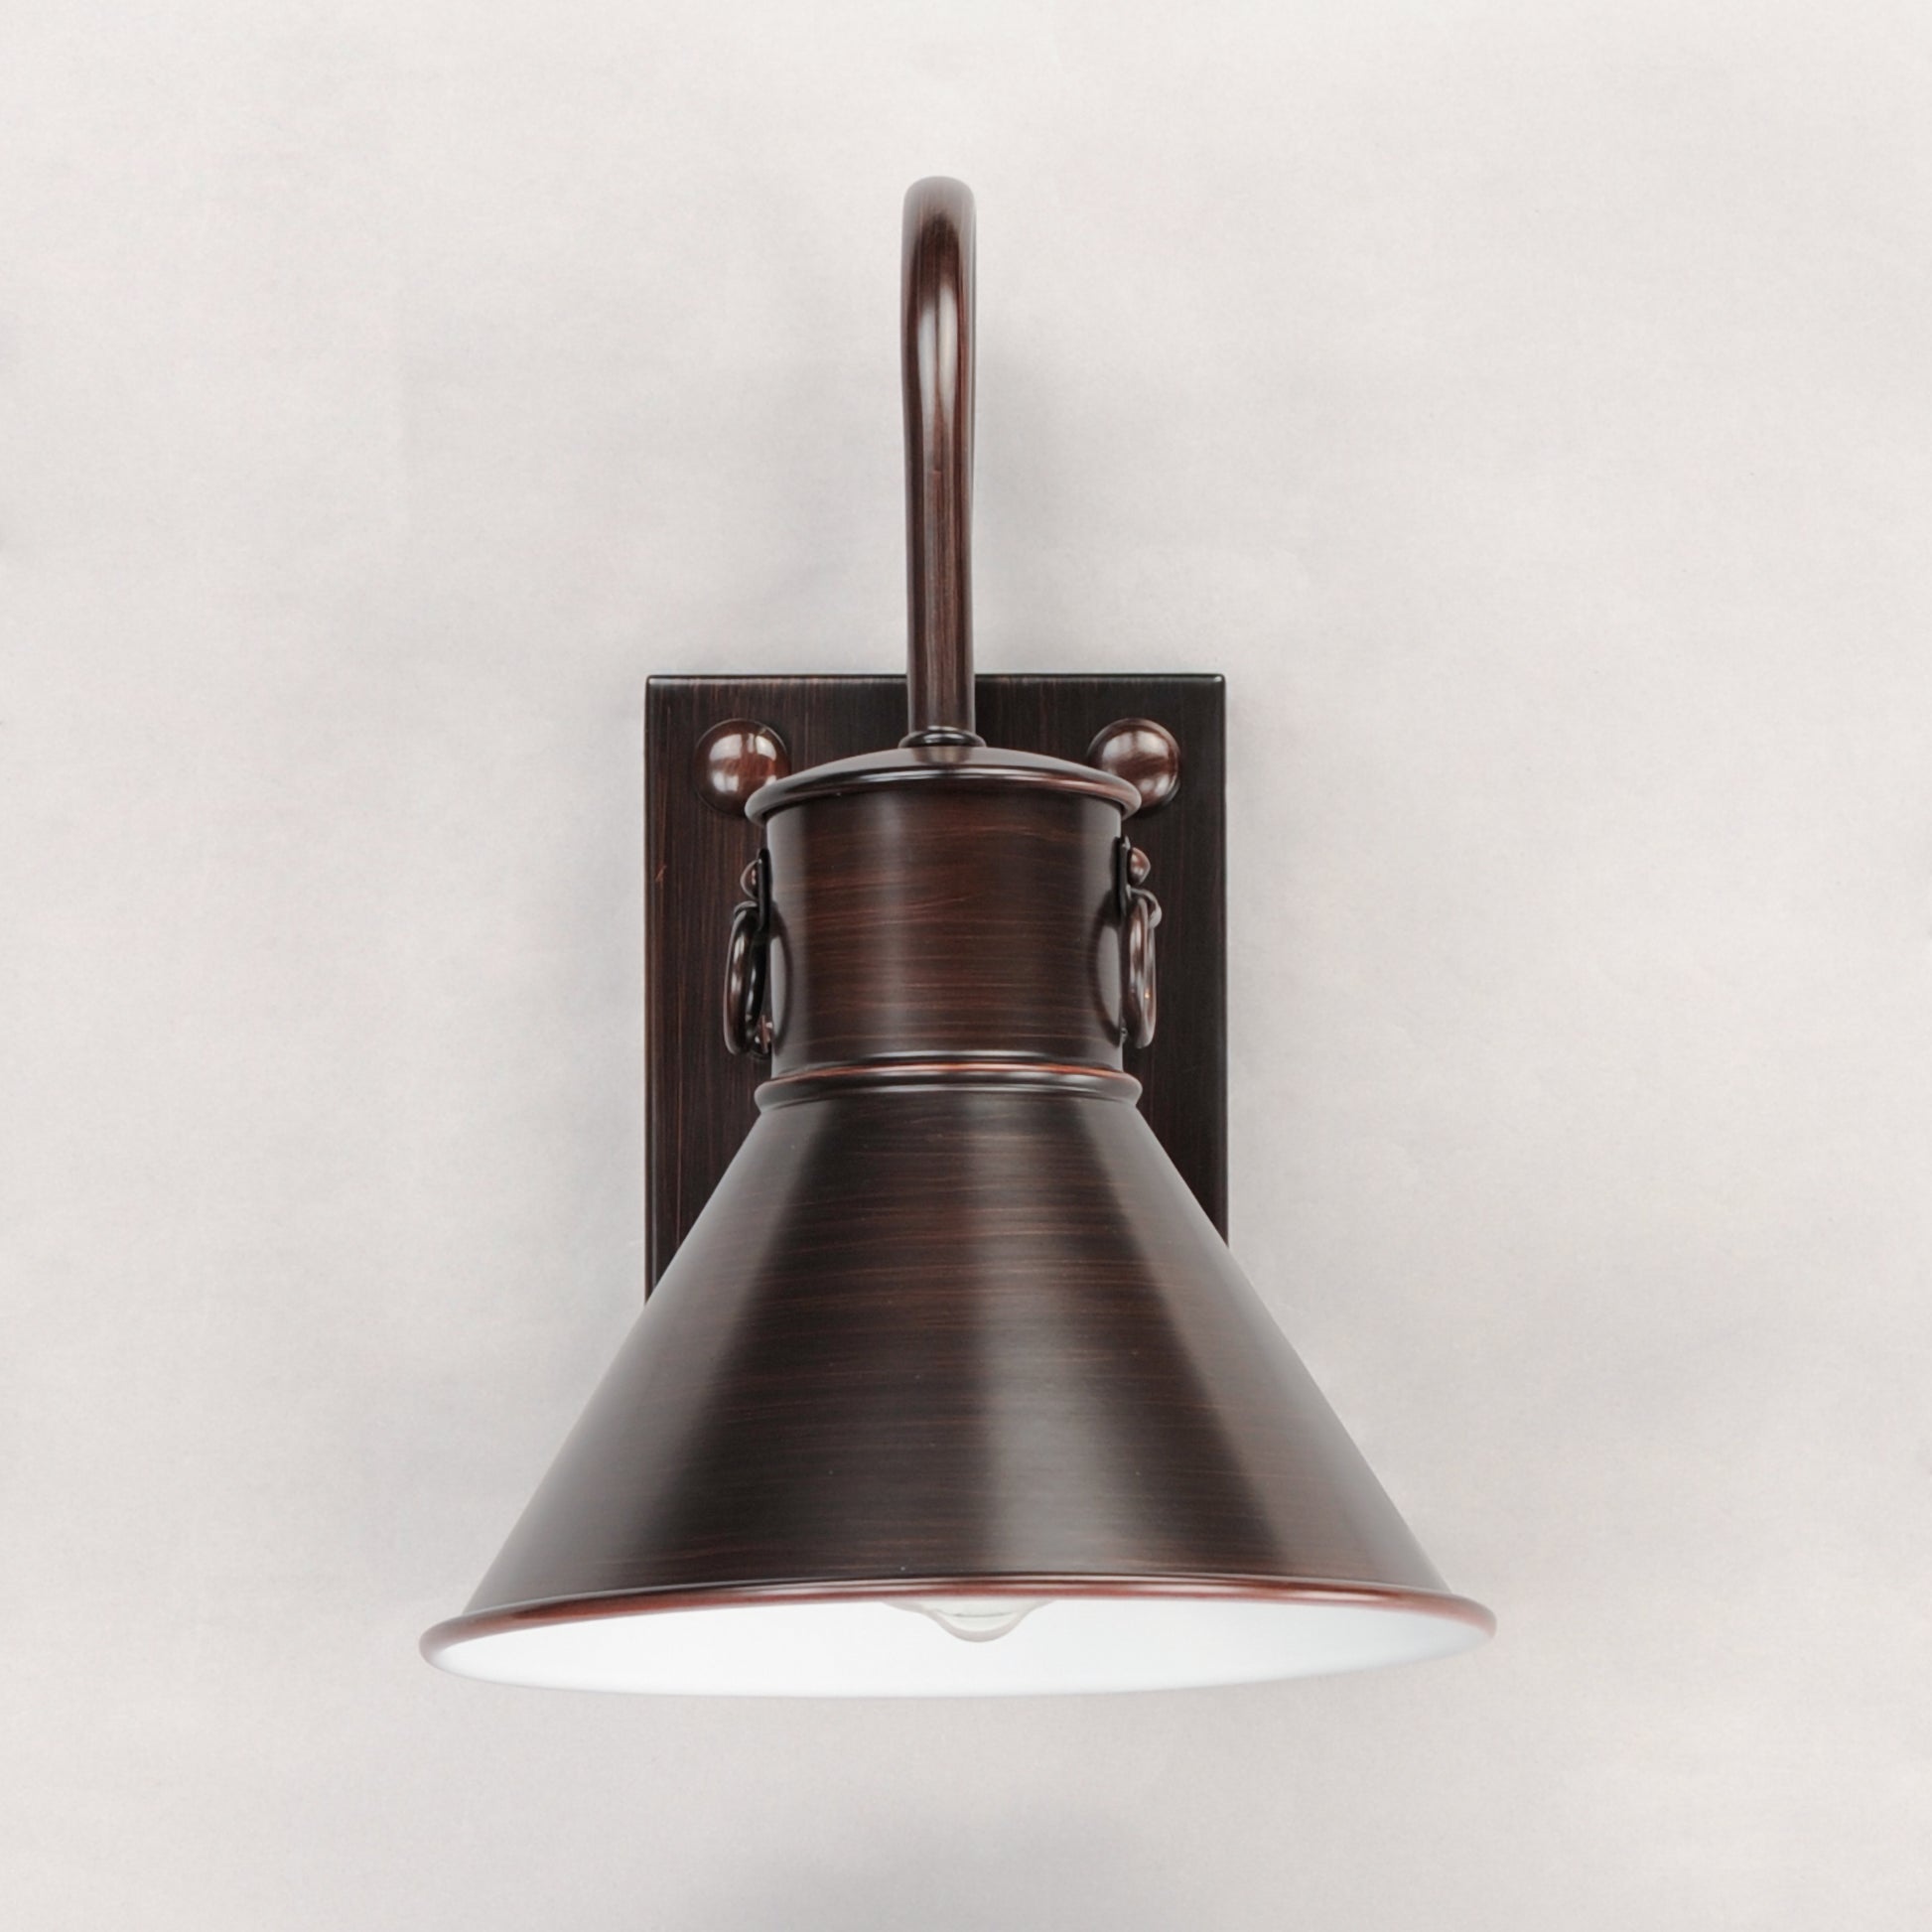 Maxim Telluride 8" Outdoor Wall Sconce